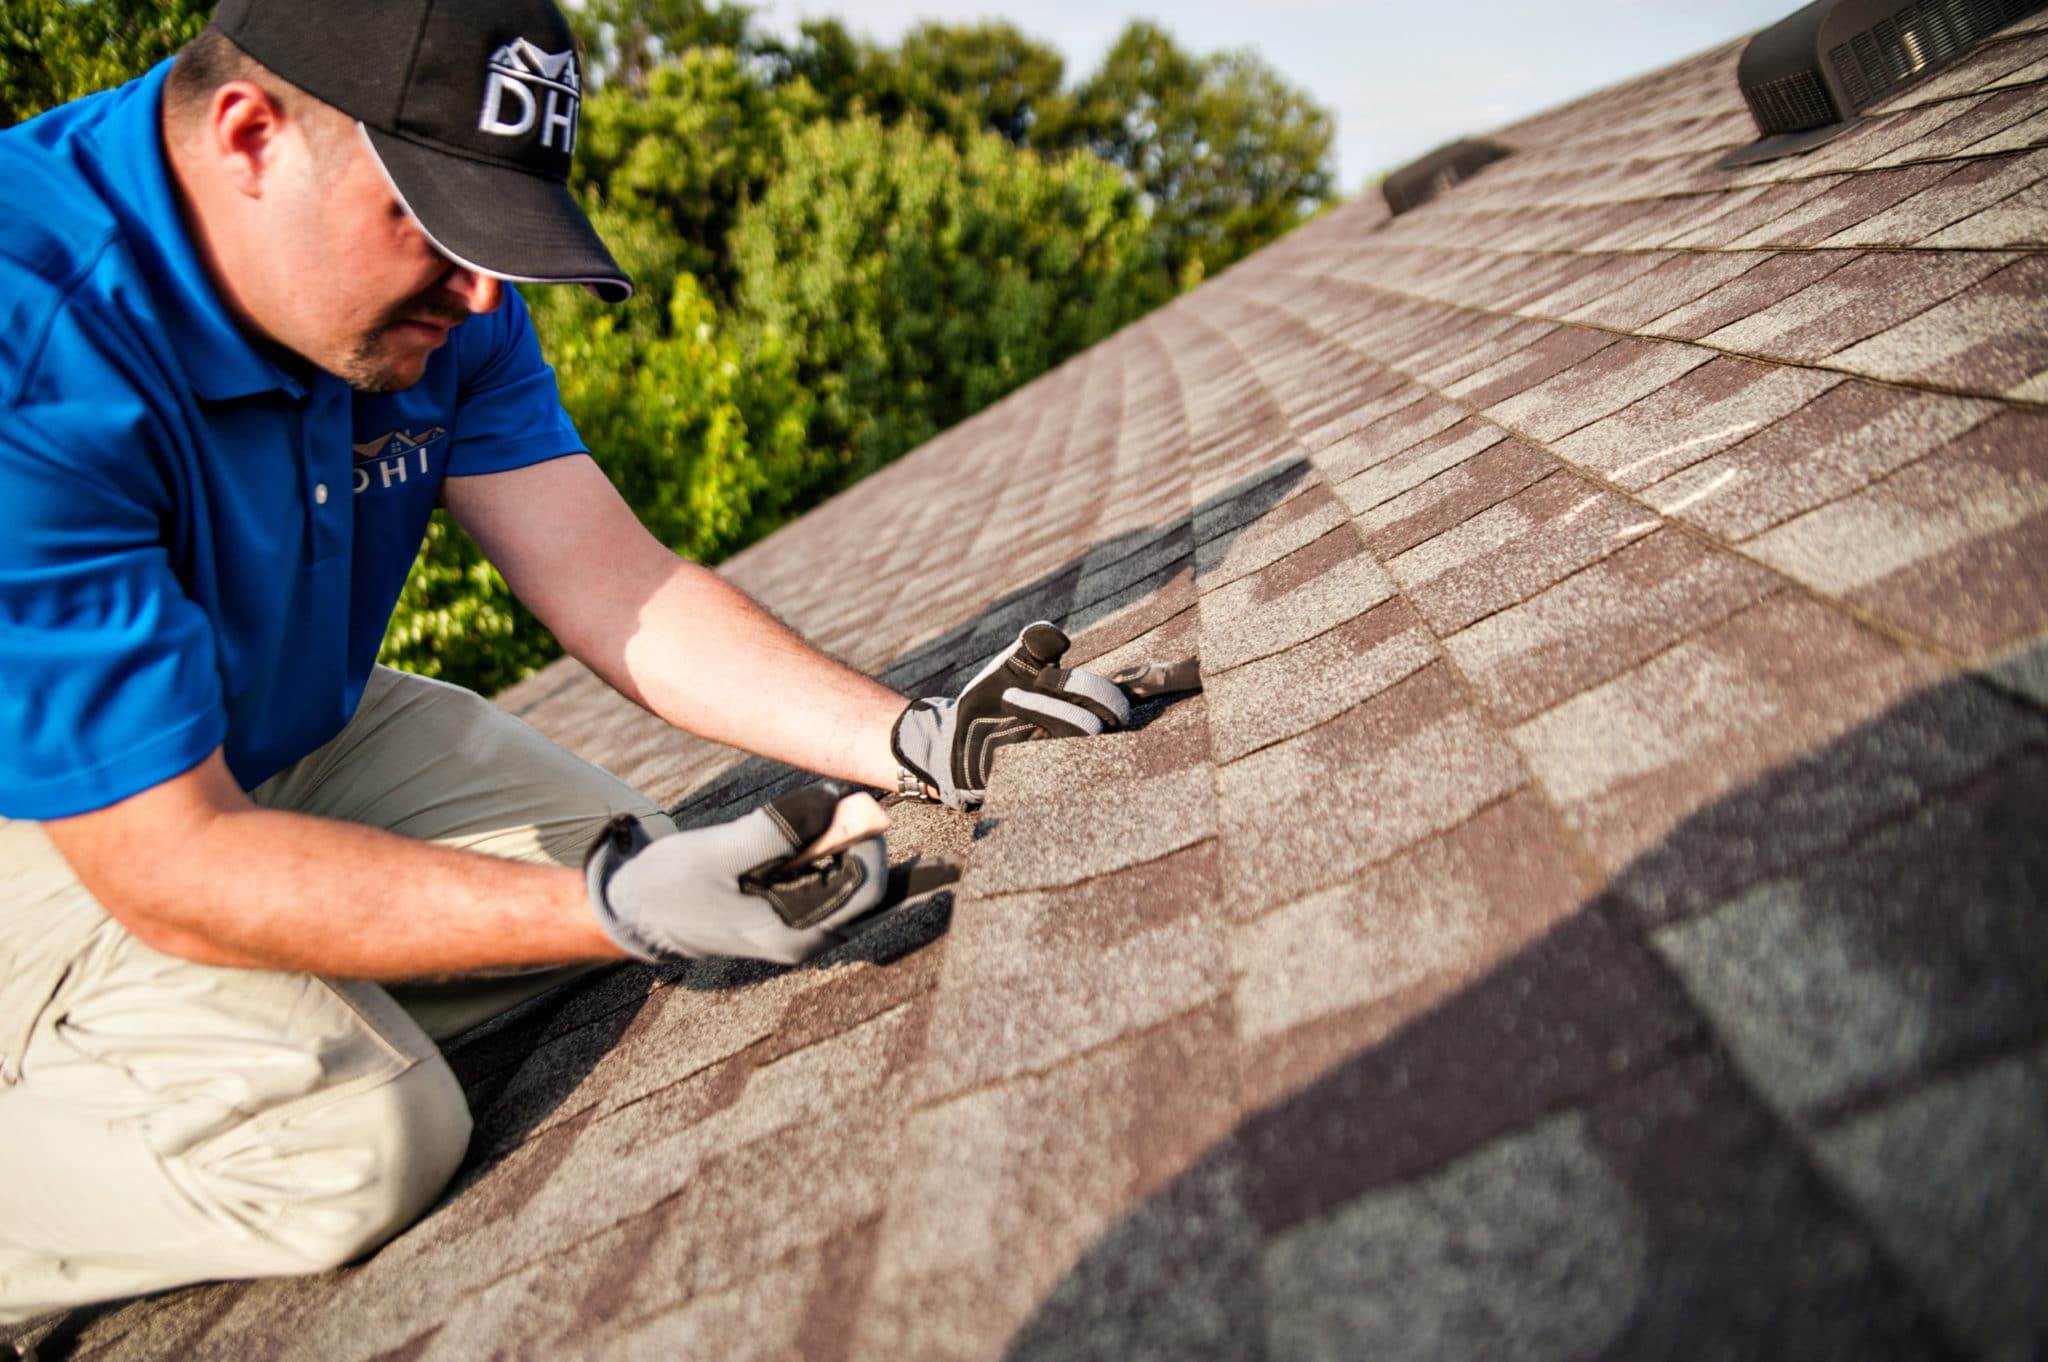 Roofing Sales Job. Creating Remarkable Experiences. Apply Today!